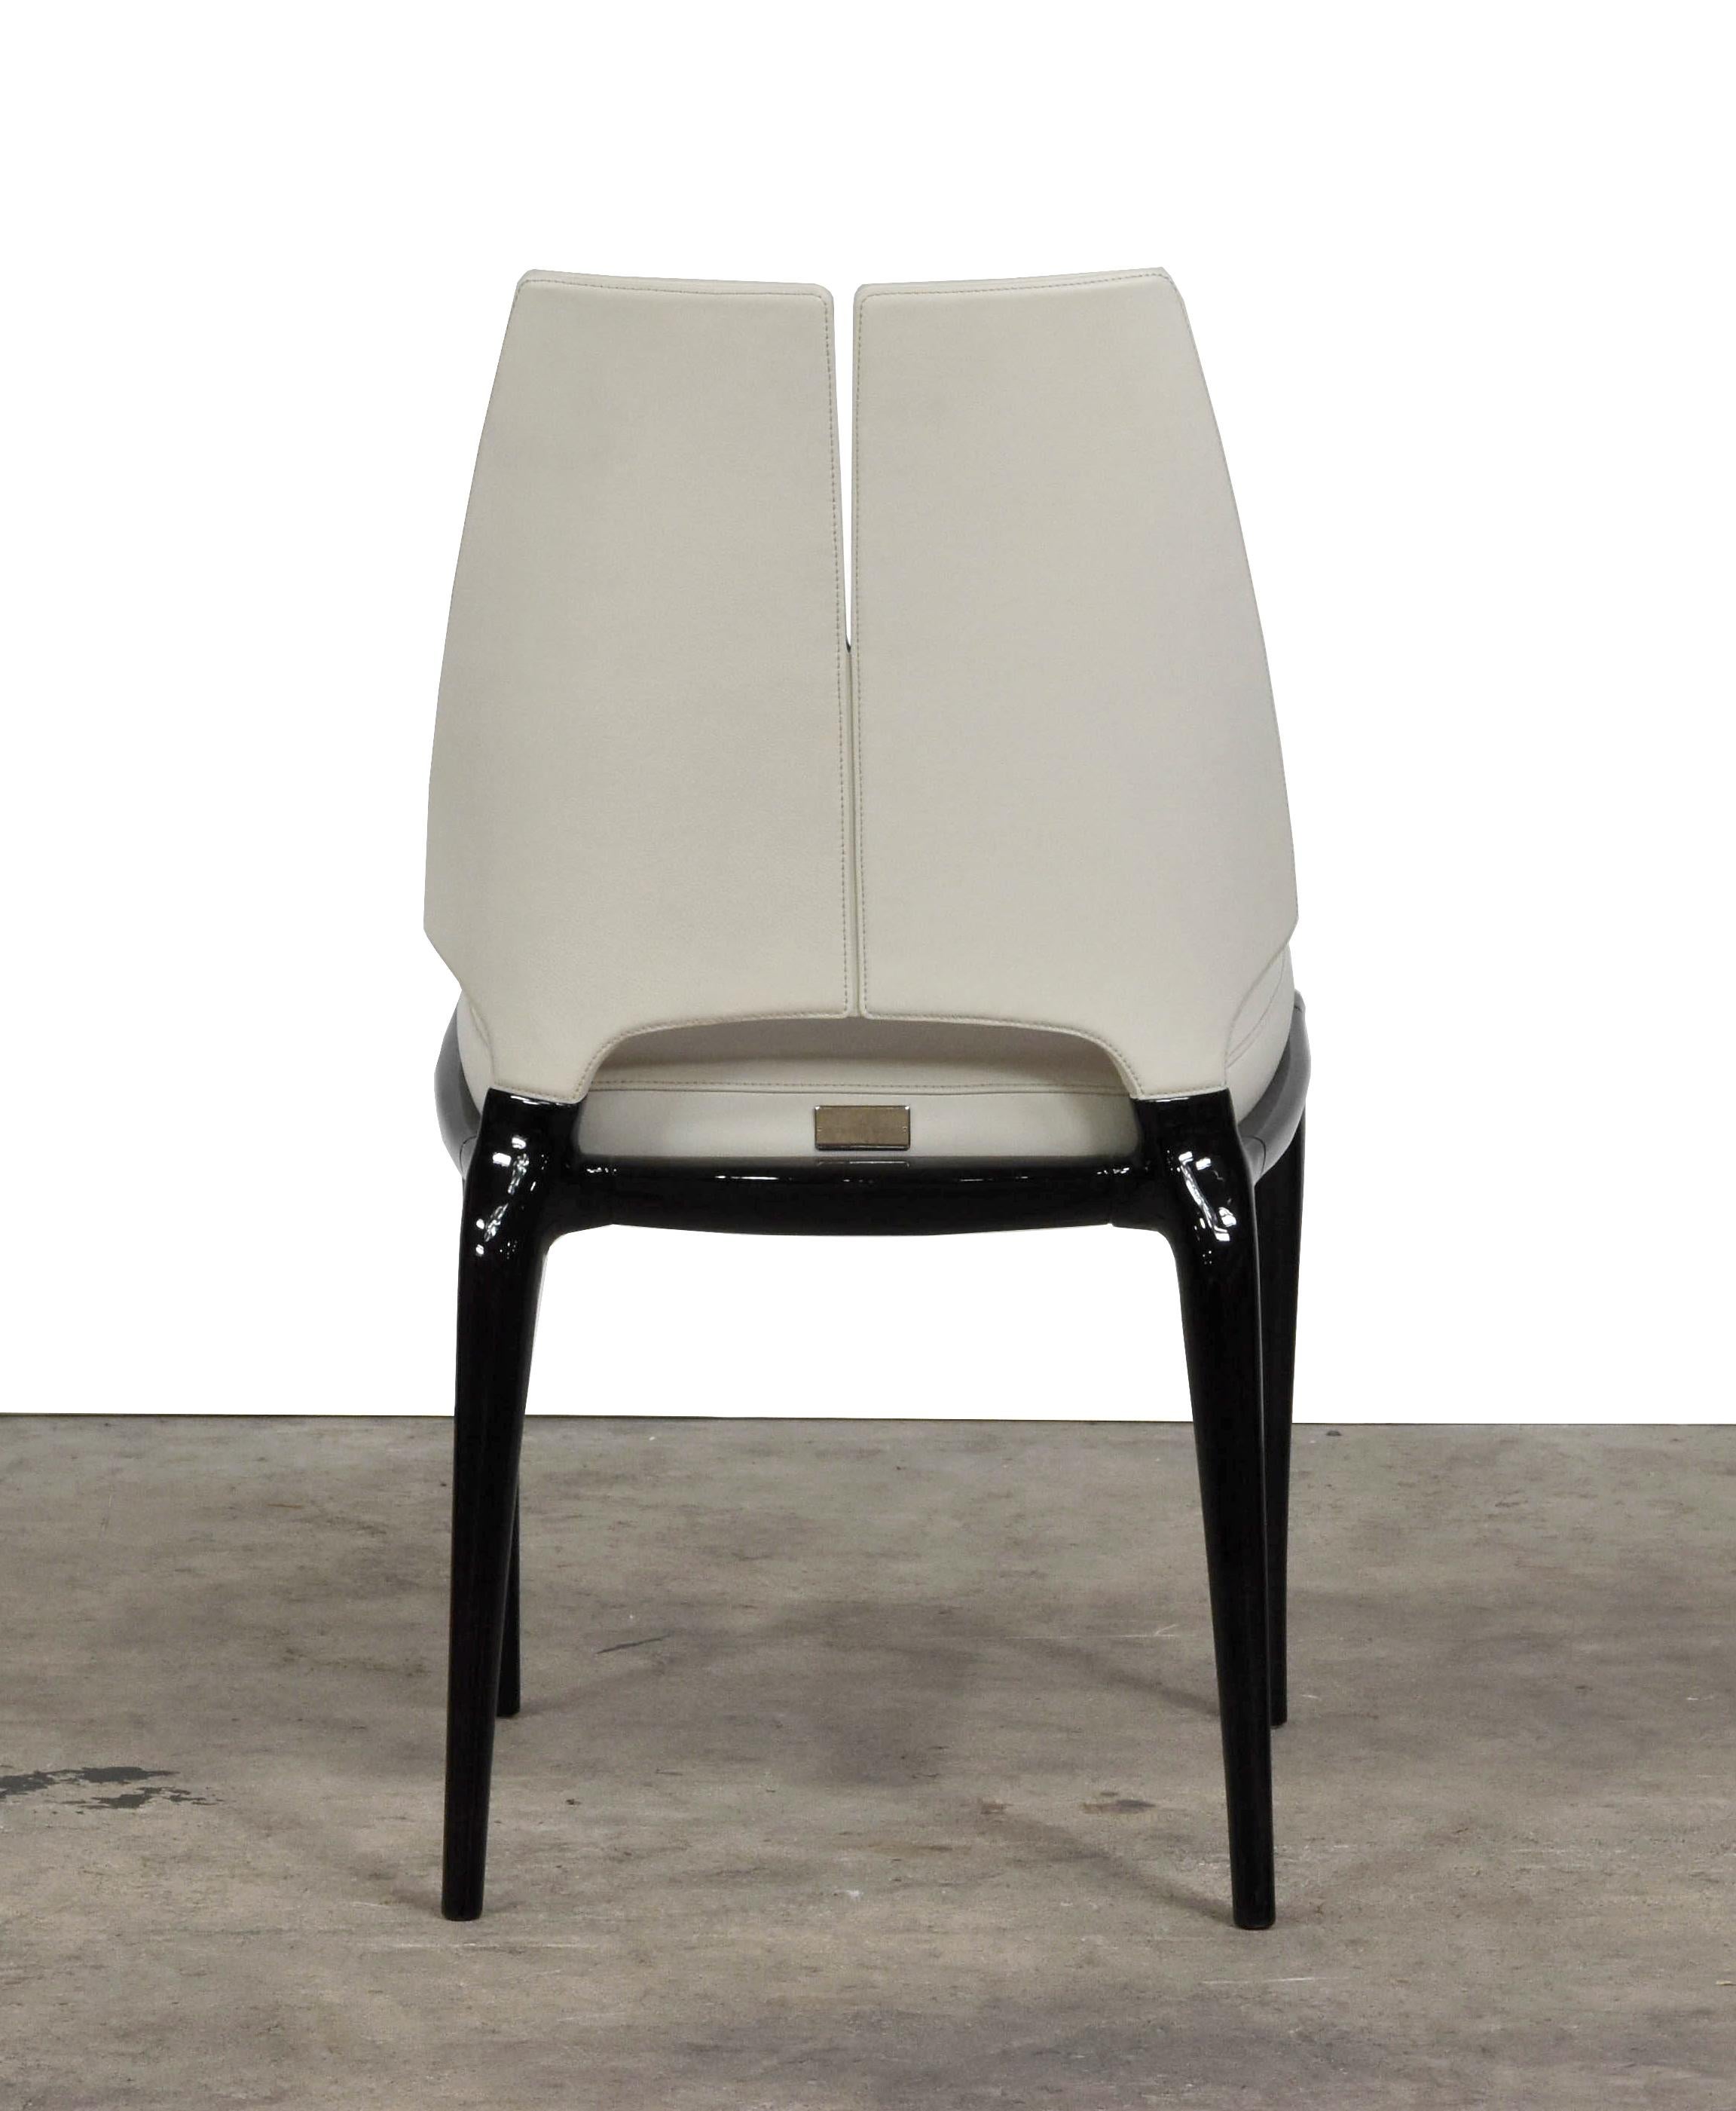 Slender and refined, the Contour chair with armrests brilliantly brings together a sober spirit with
contemporary taste. Made with dark-lacquered wood, it houses the cream colored leather seat
cushion, which matches the seatback upholstery.